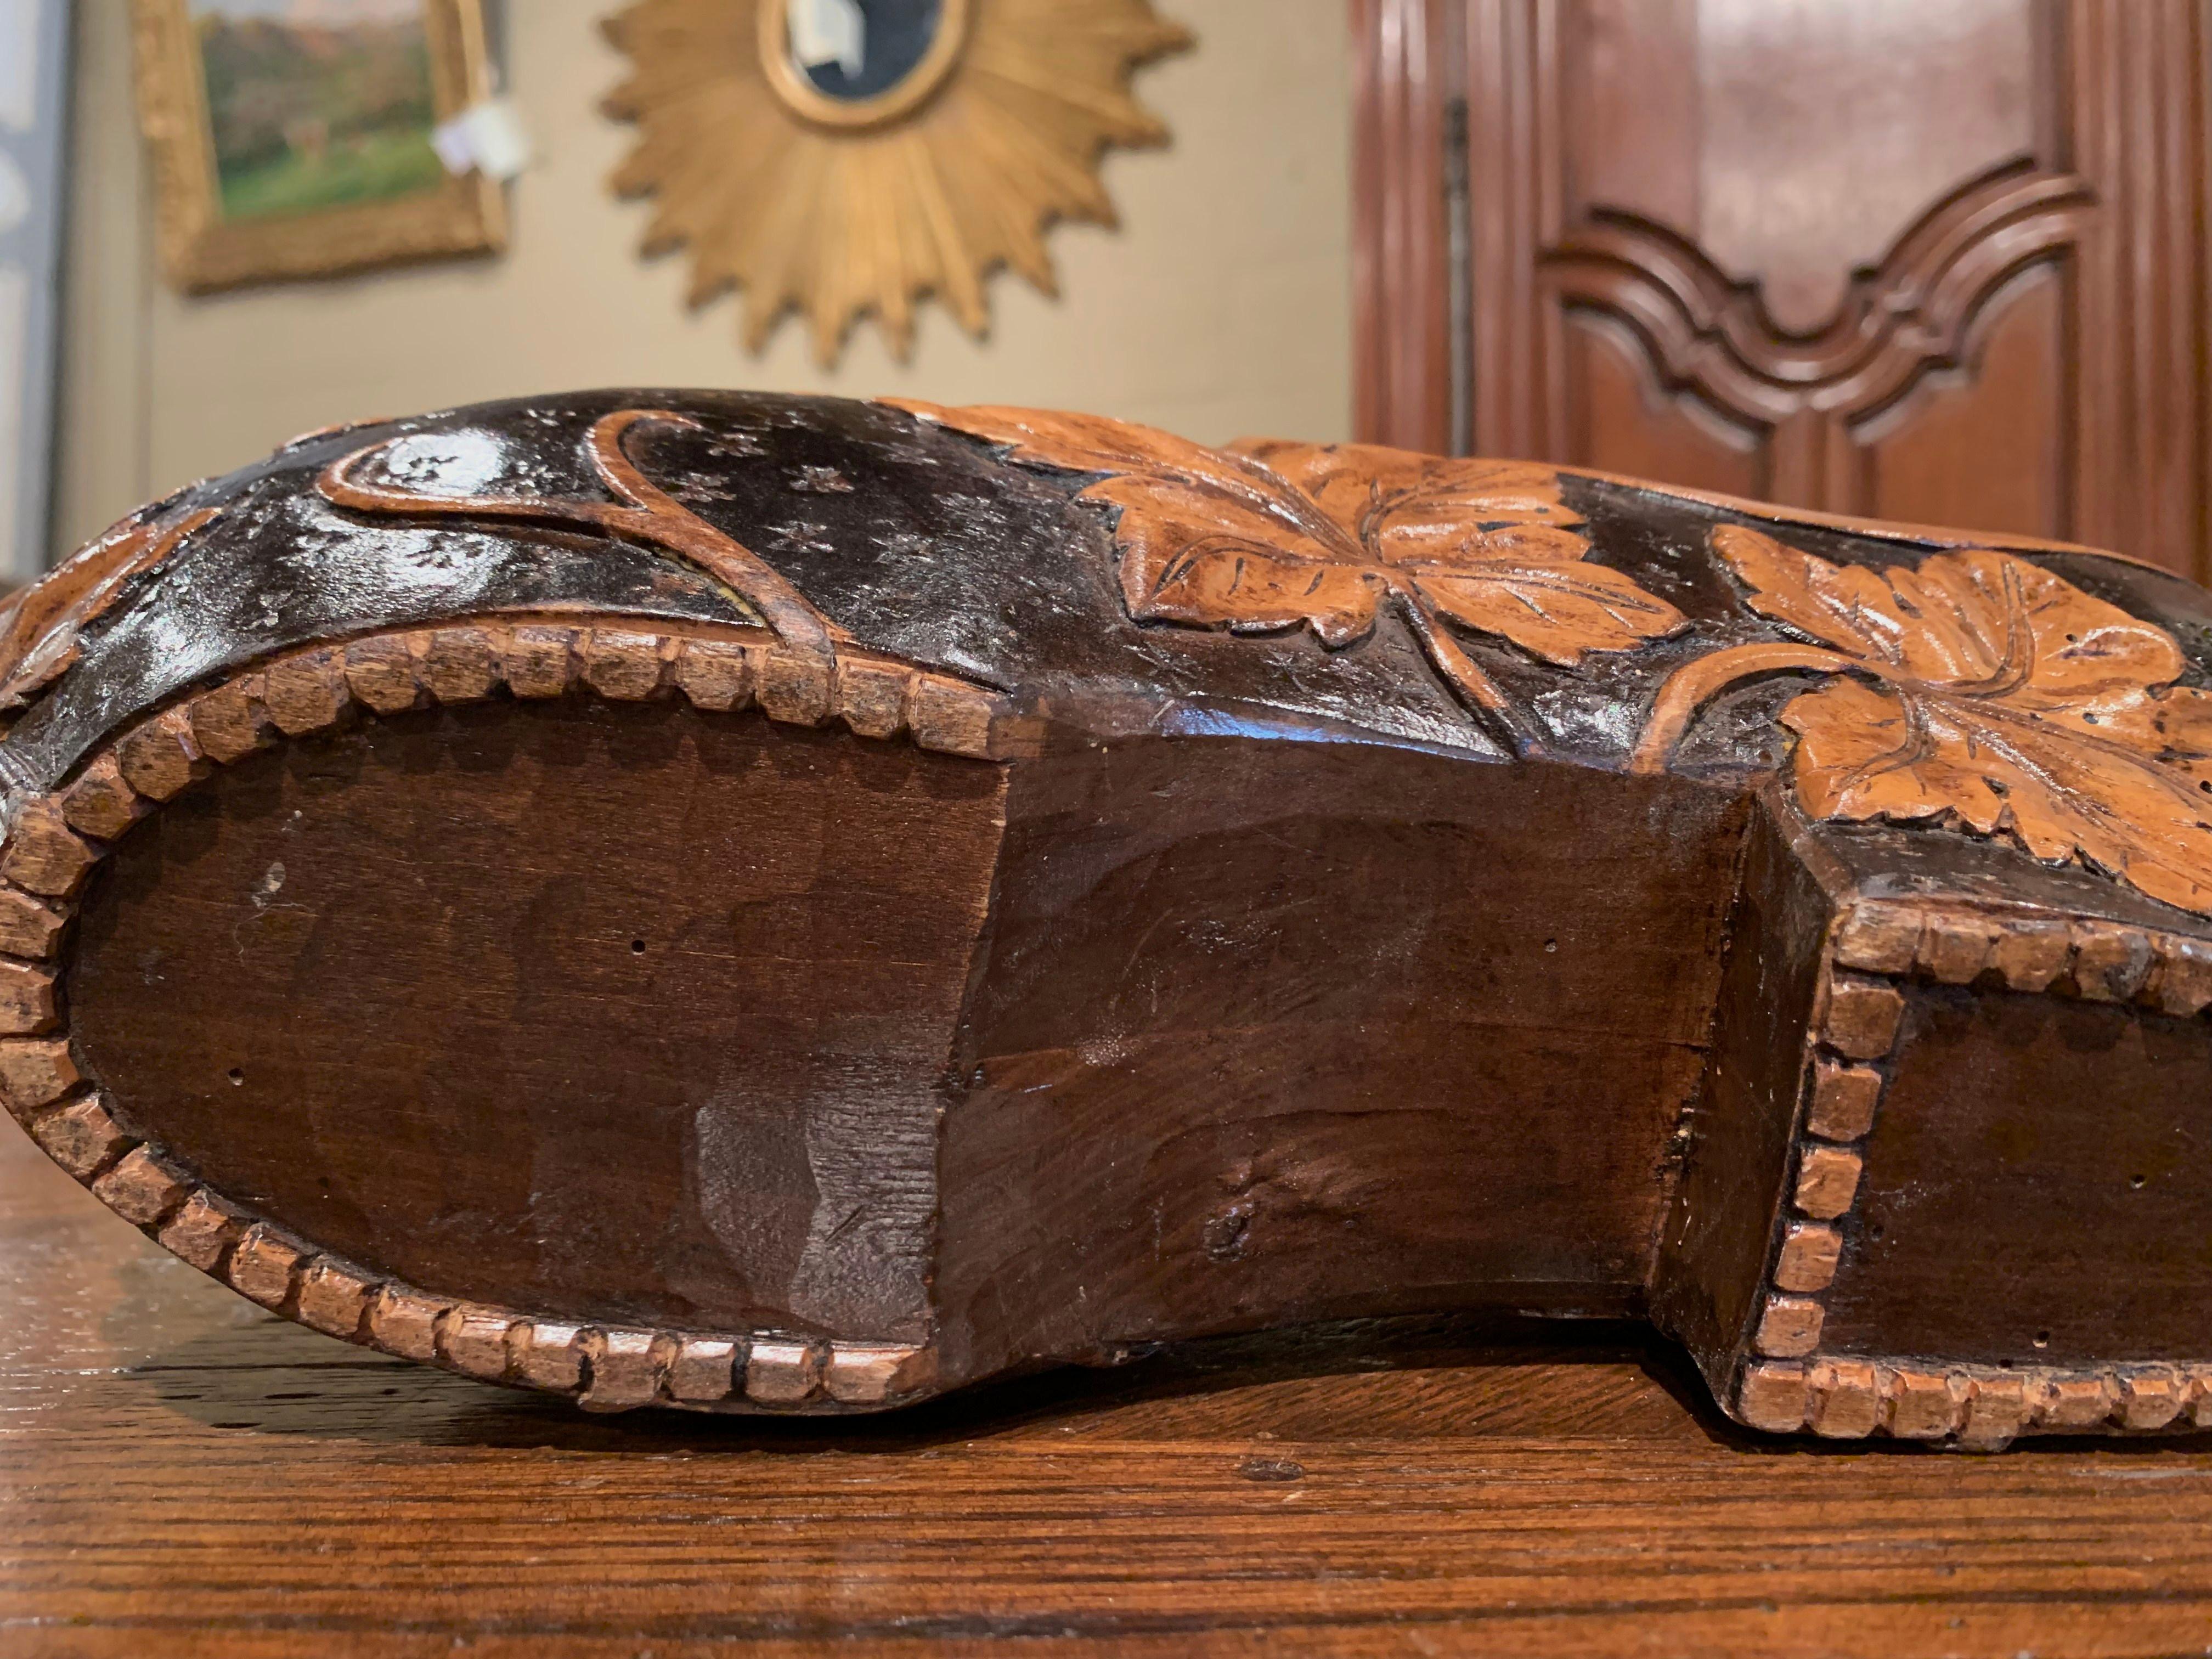 Early 20th Century French Carved Walnut Wine Bottle Holder Clog with Vine Decor For Sale 4